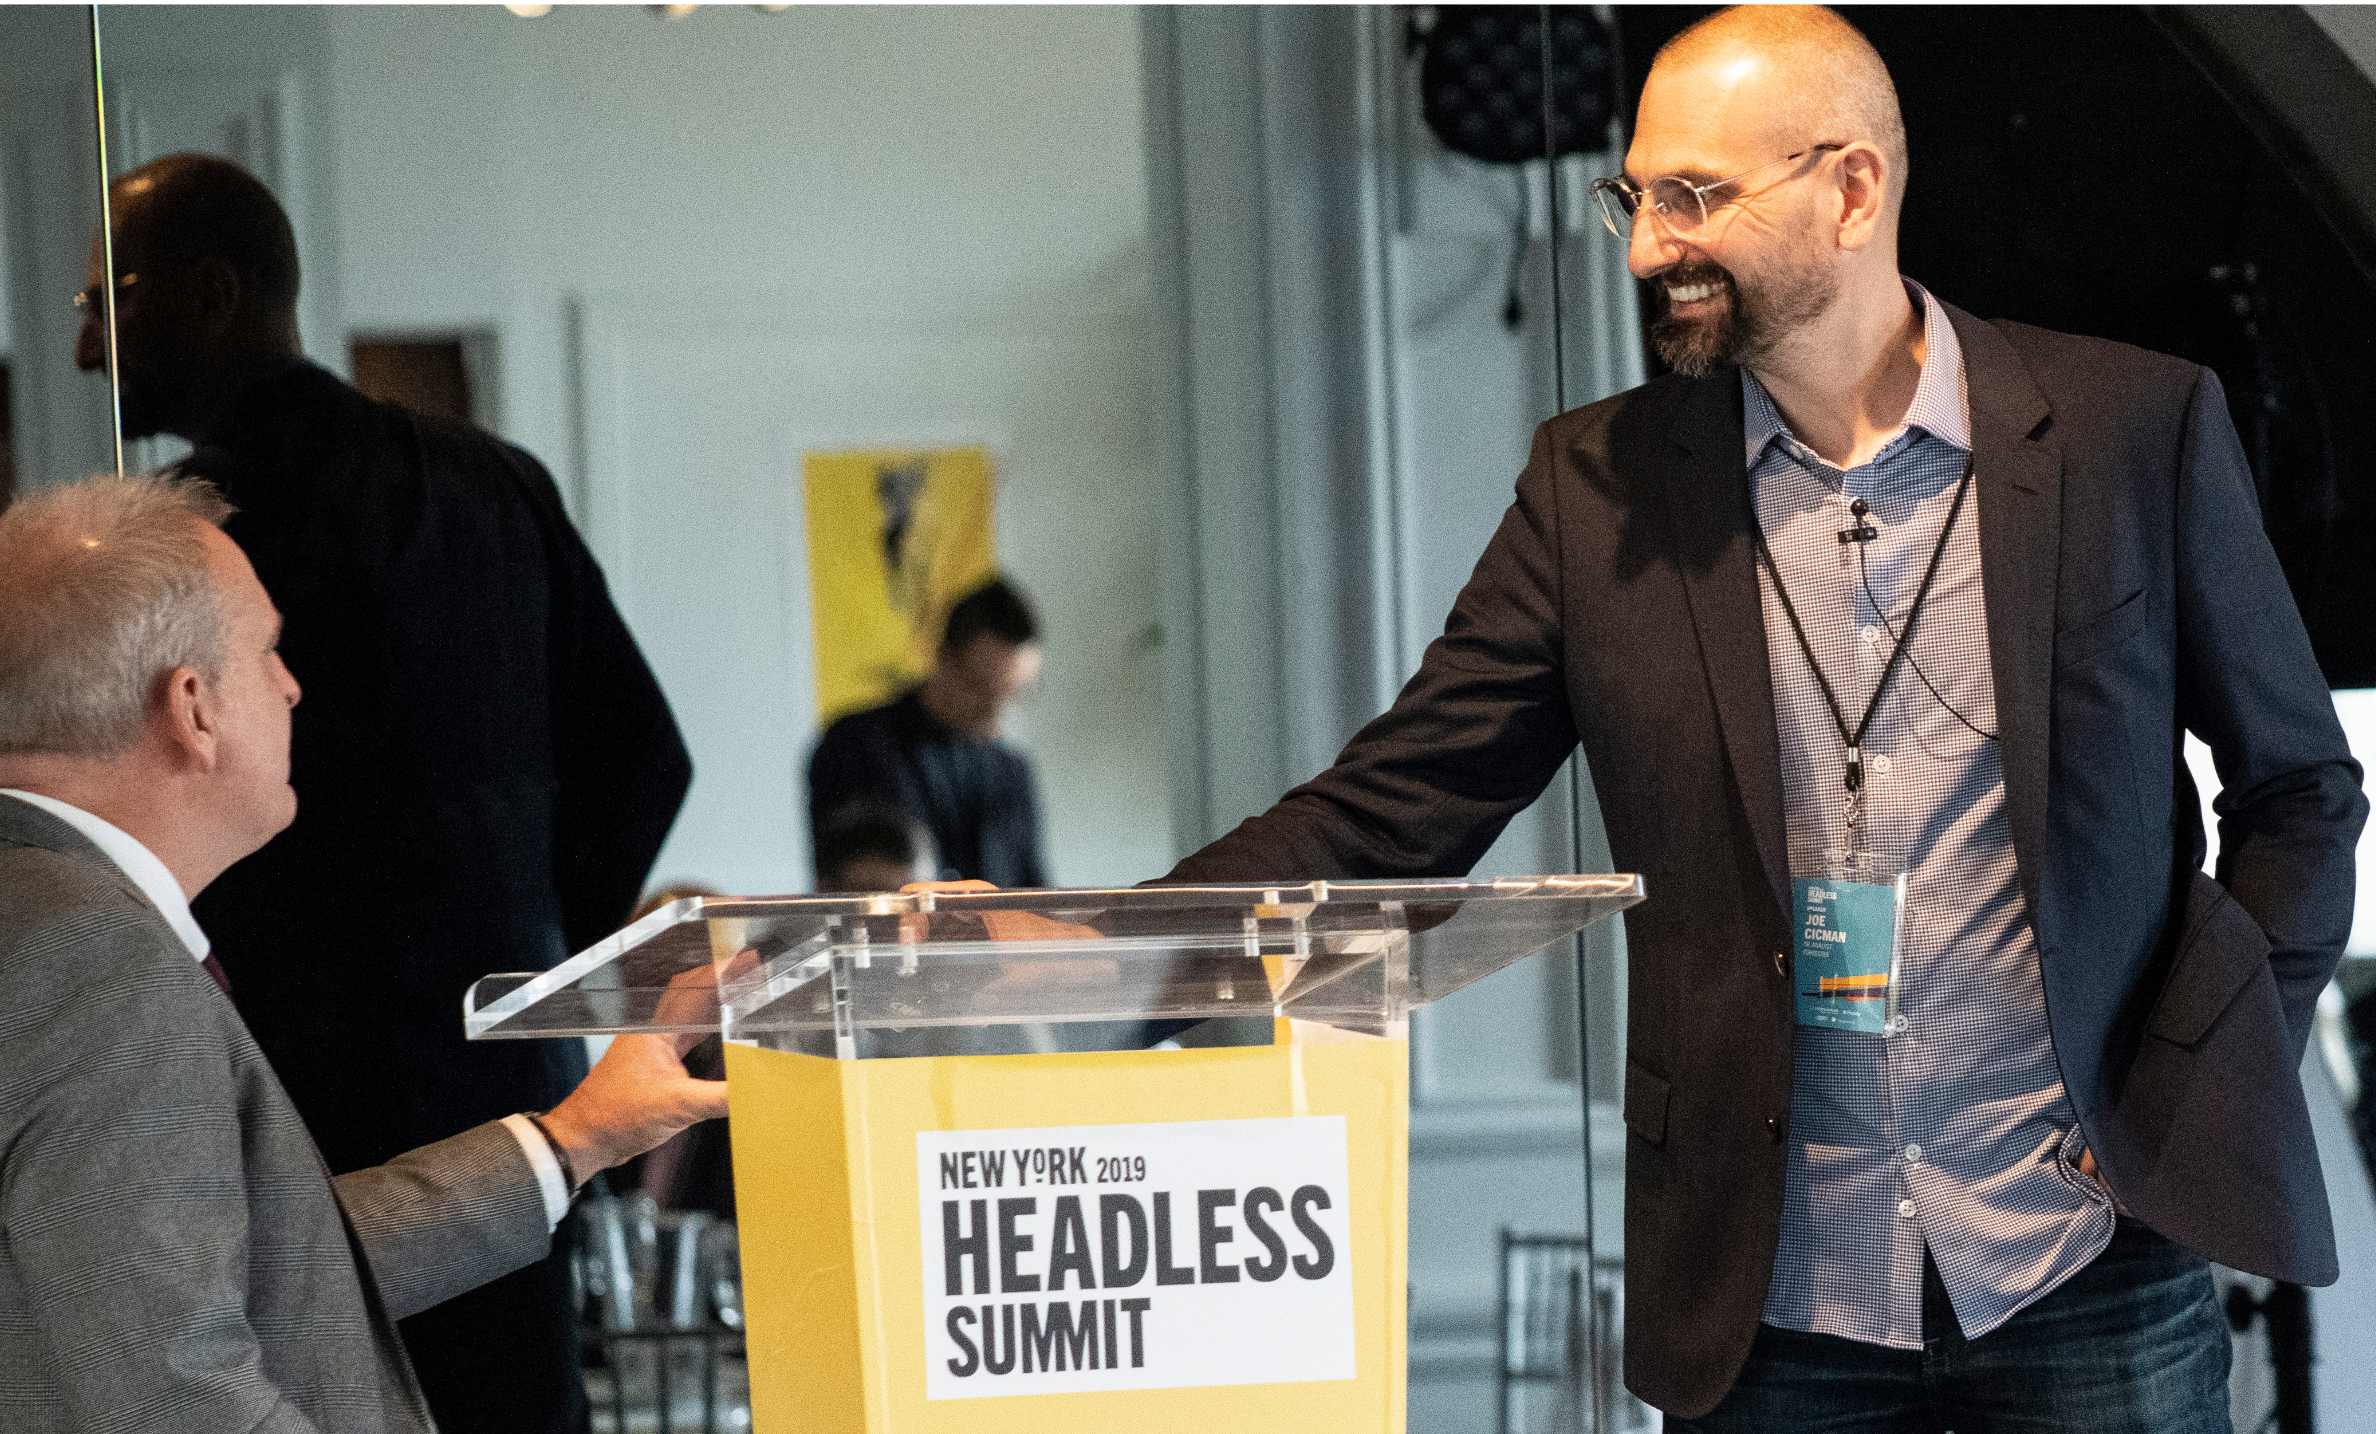 Highlights from The Headless Summit NYC